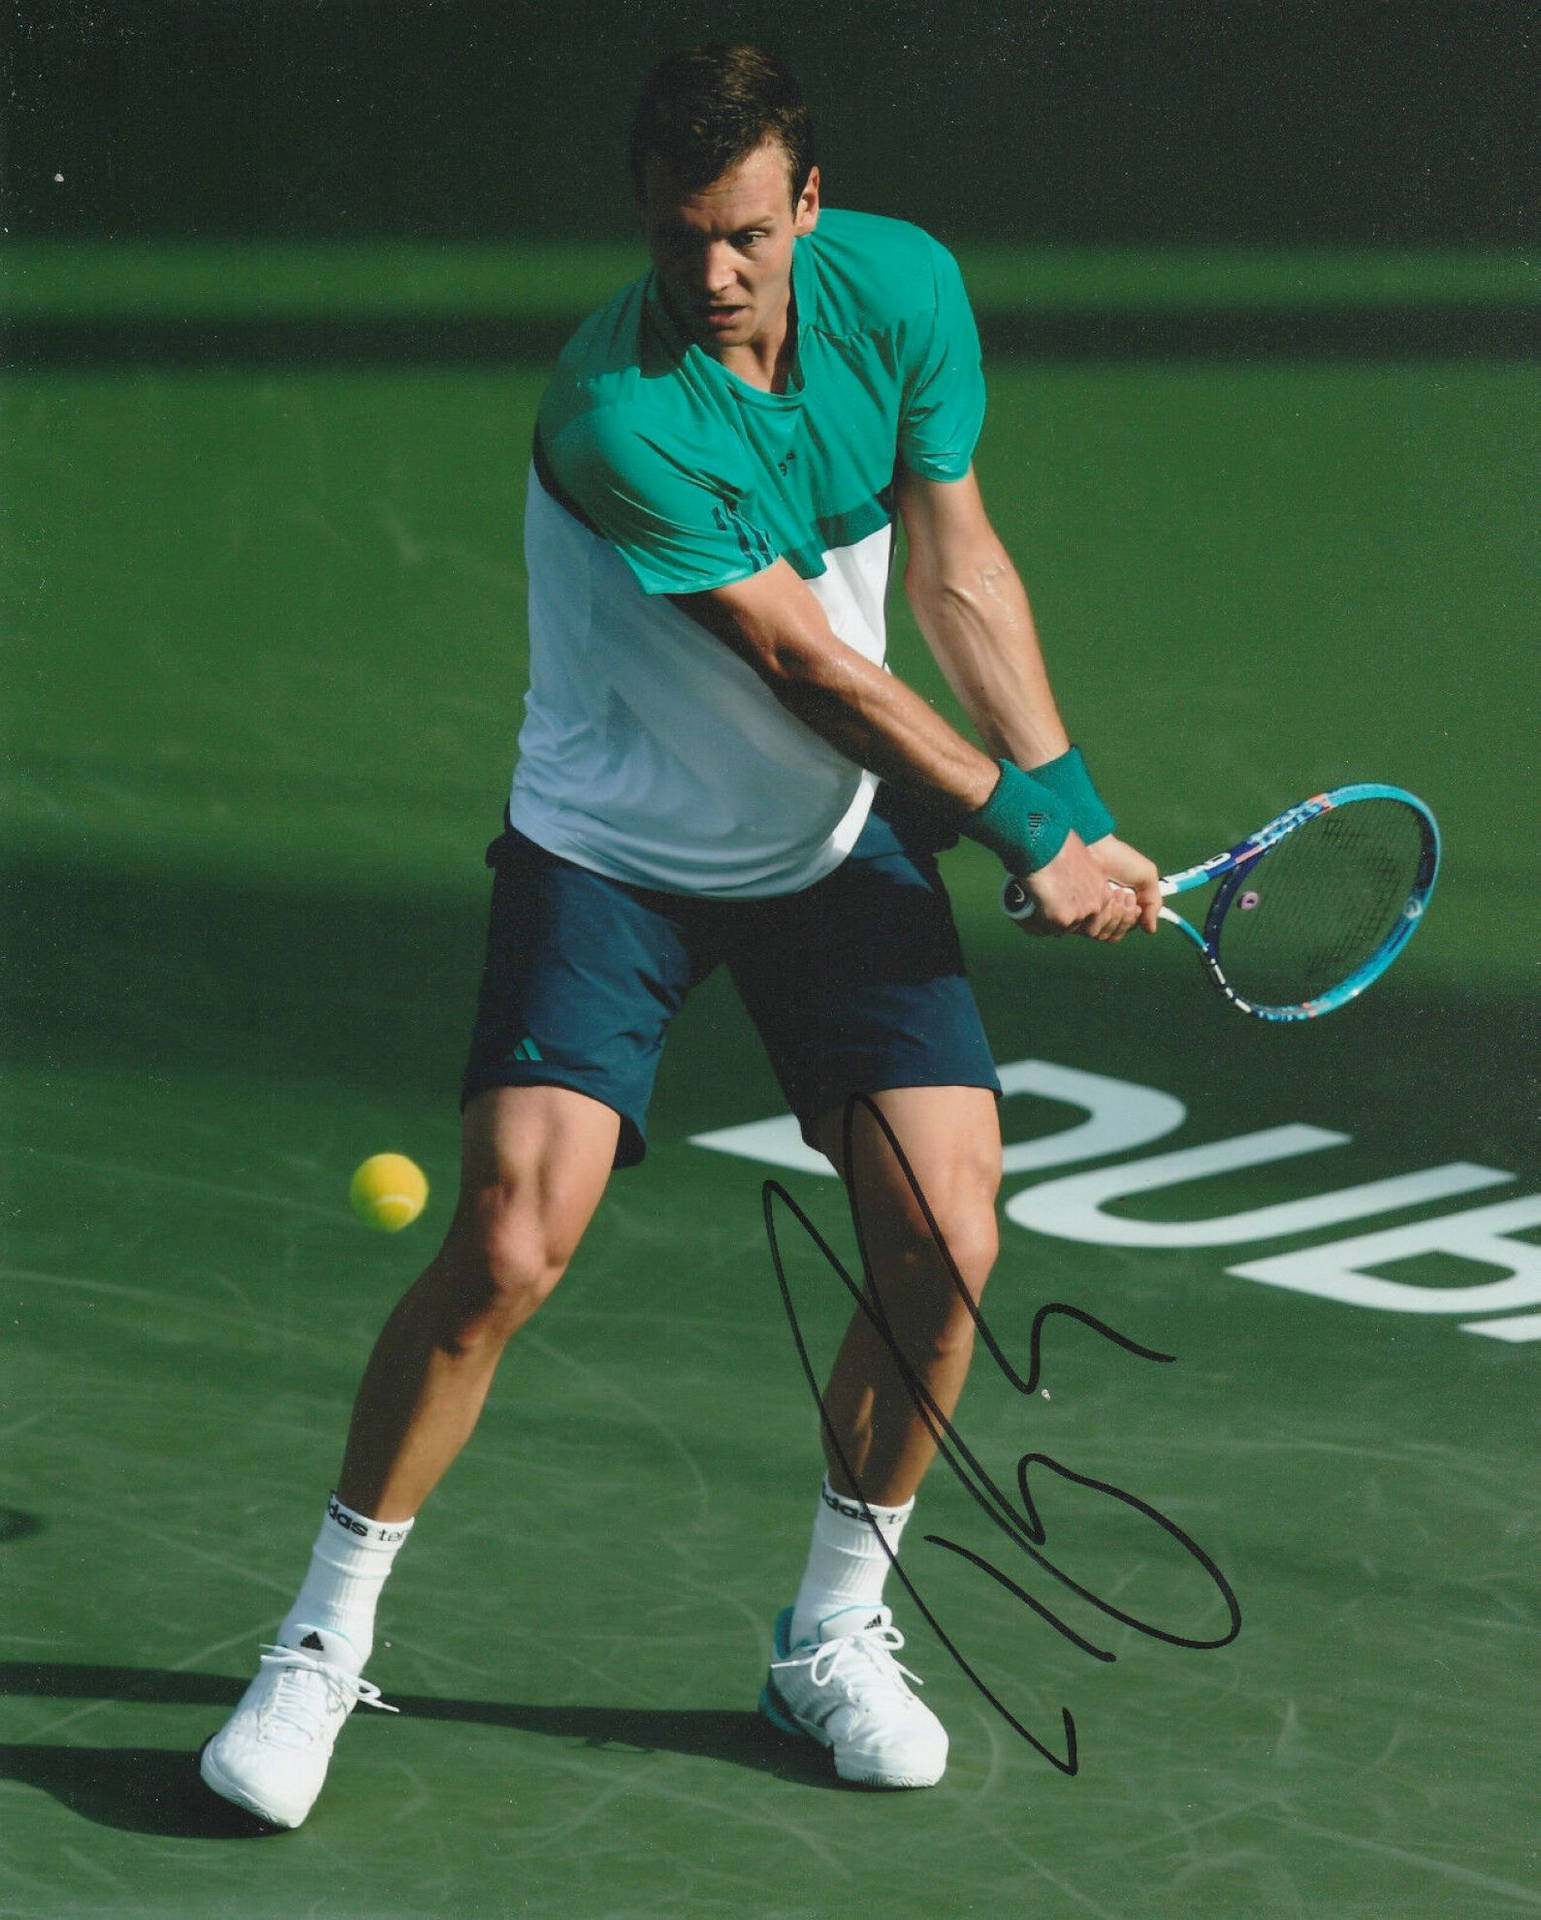 Tomas Berdych In Action On The Tennis Court Wallpaper